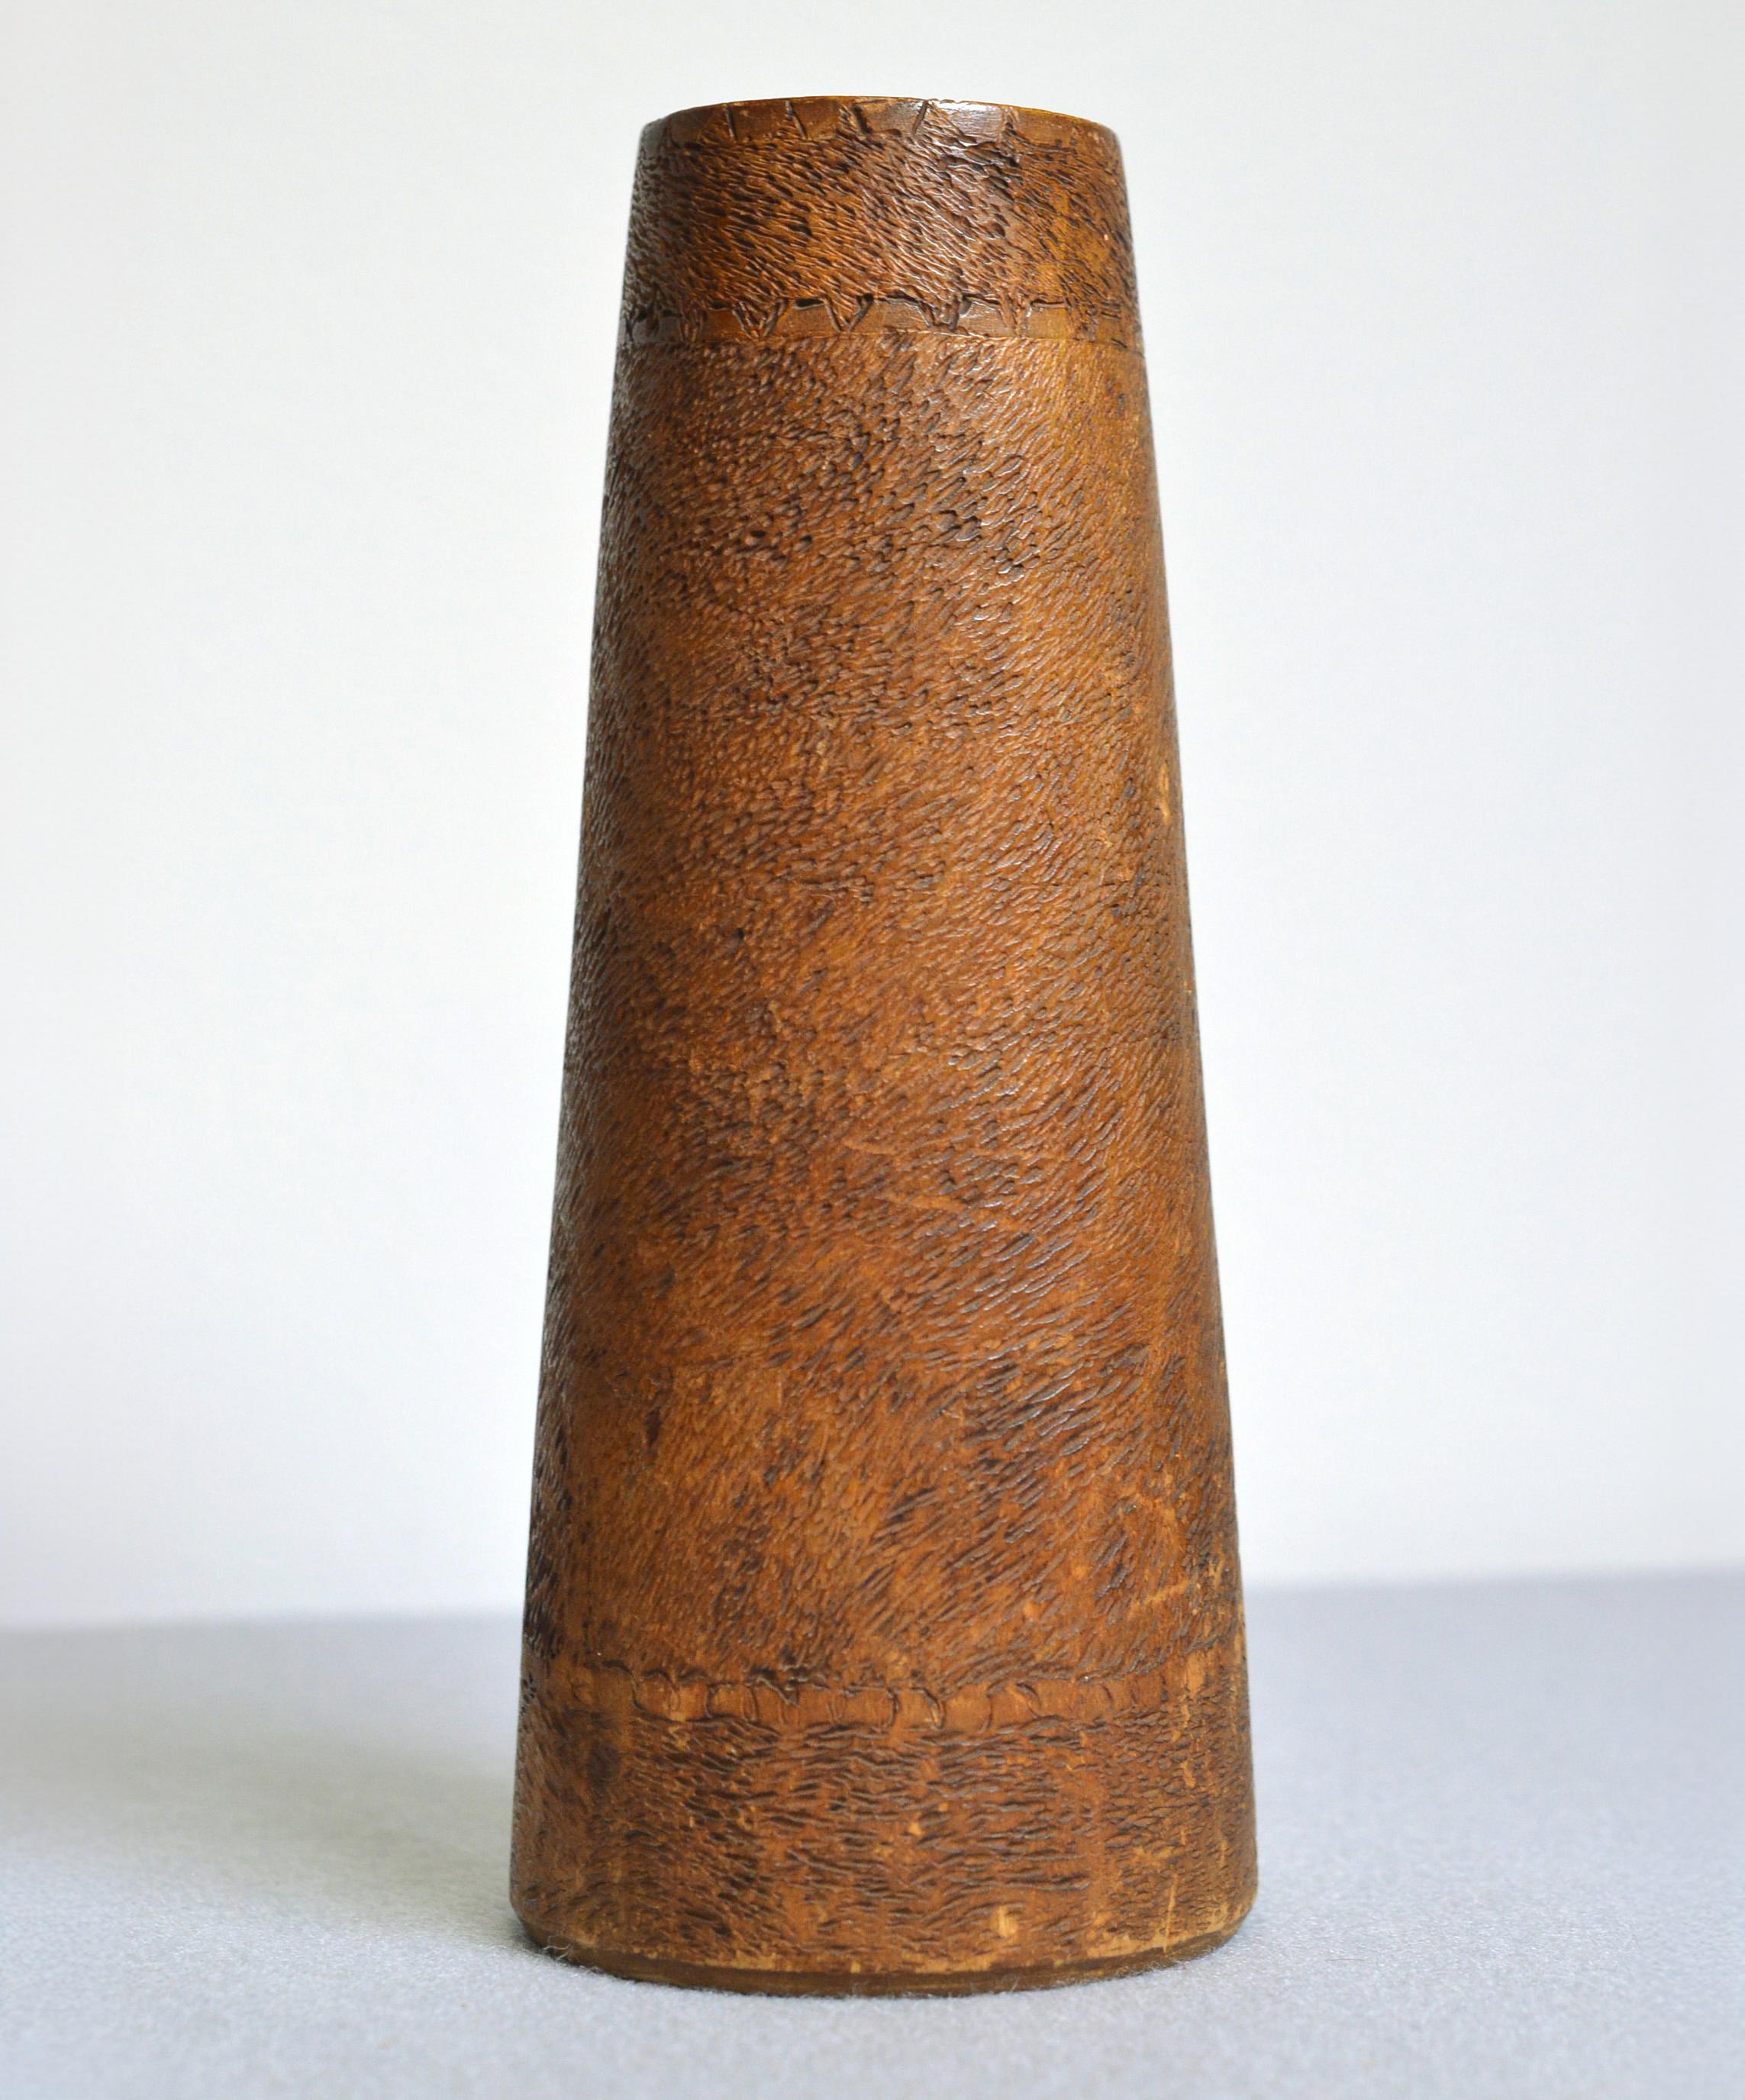 Rare Antique Russian Abramtsevo Vase Hand Wood Carving Painting by Boehm  In Good Condition For Sale In Sweden, SE